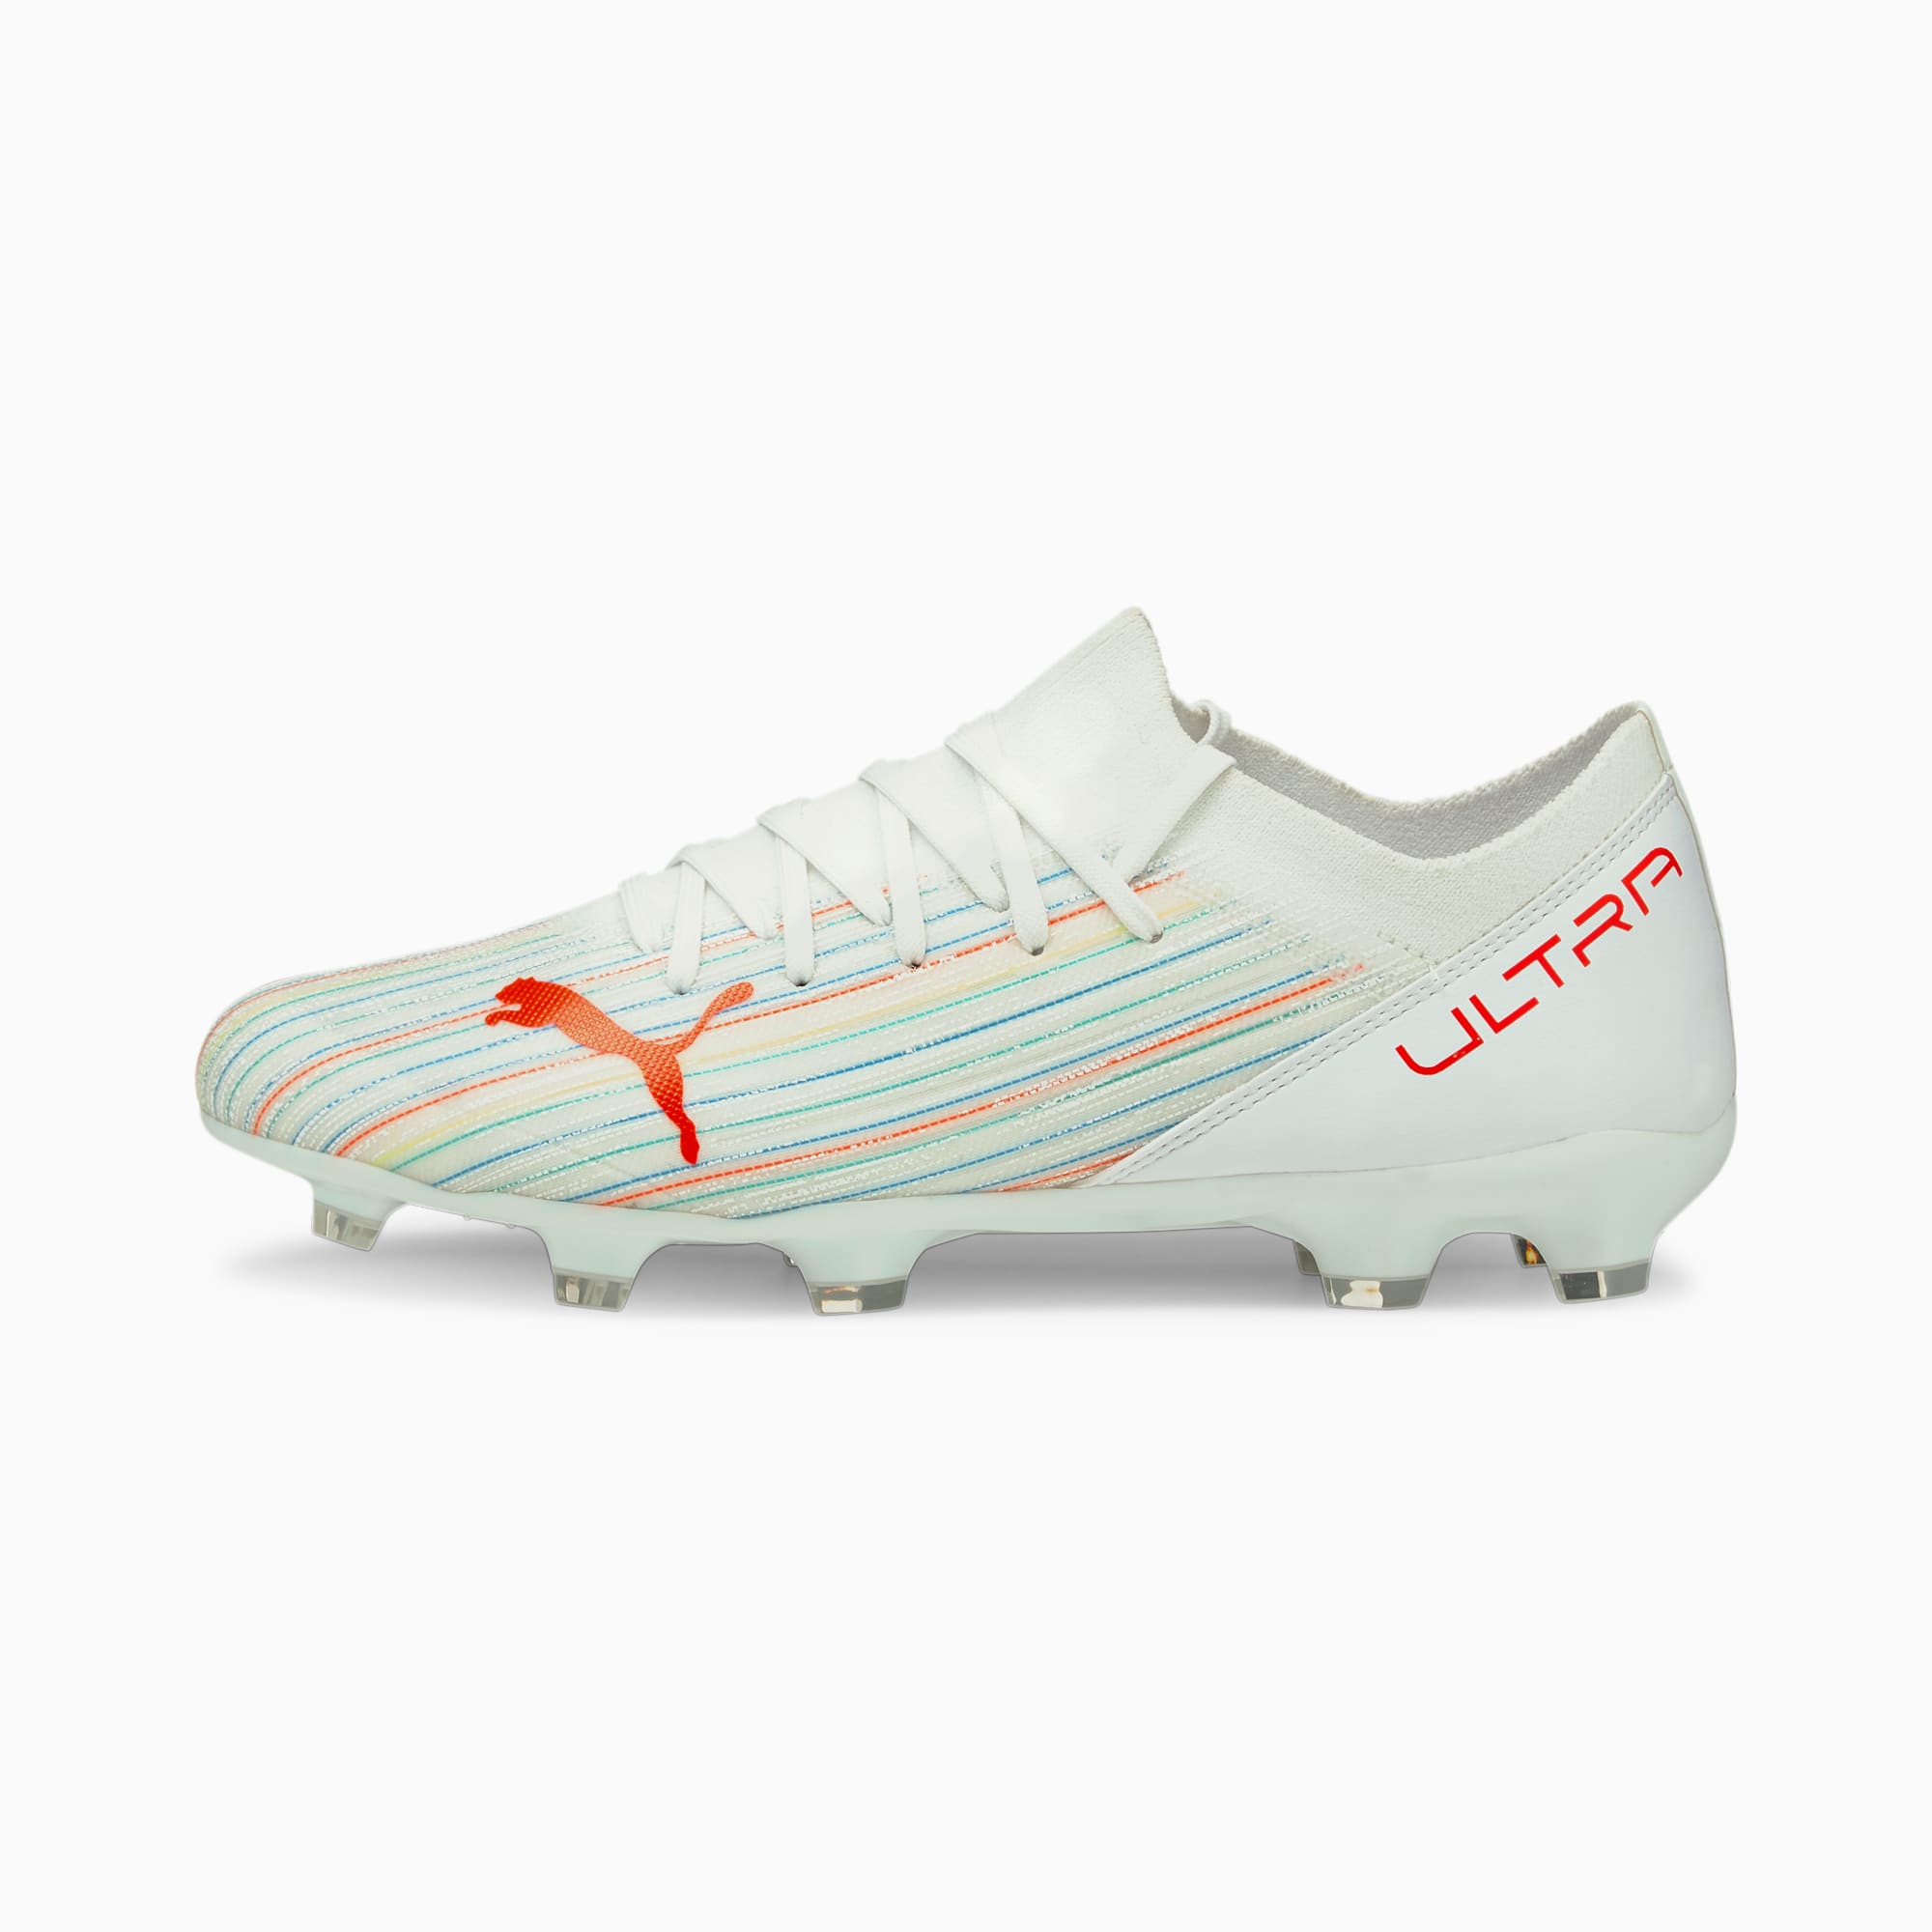 PUMA Chaussures de football ULTRA 3.2 FG/AG homme, Blanc/Rouge, Taille 41, Chaussures